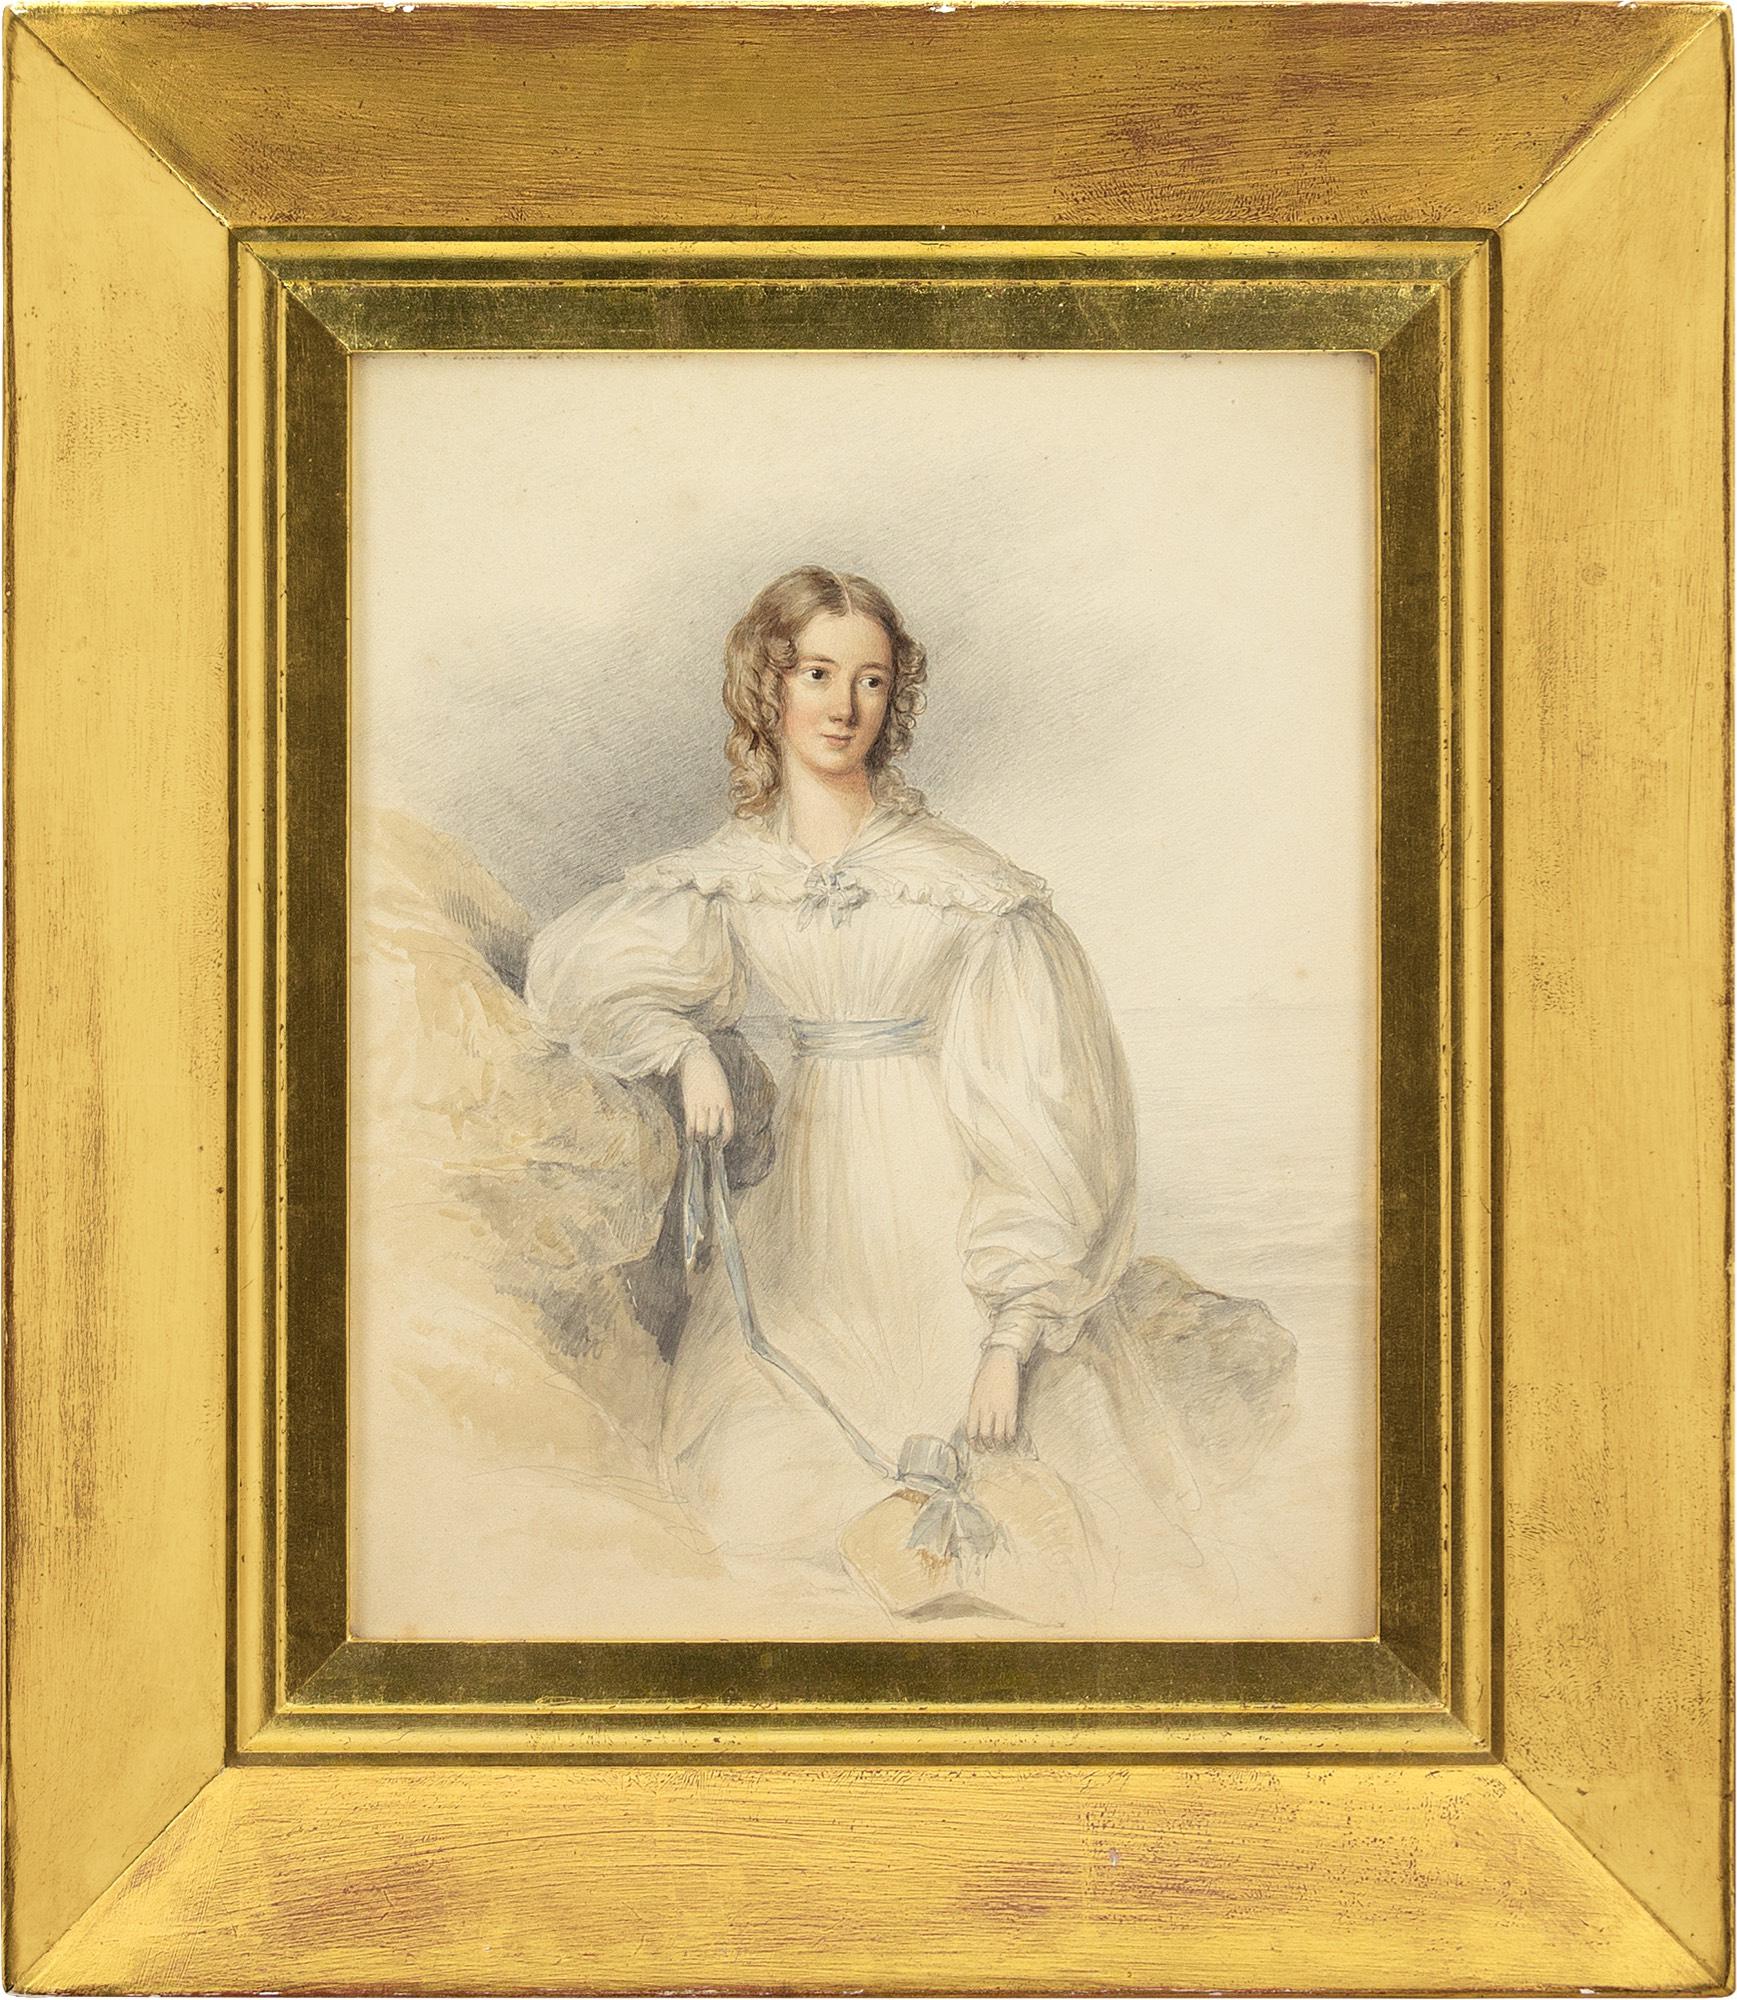 This exquisite portrait by British artist William Moore (1790-1851) depicts a young lady wearing a beautiful white dress with gigot sleeves. It’s a gentle portrayal representing the romanticised ideals of the 1830s. The portrait dates to circa 1833